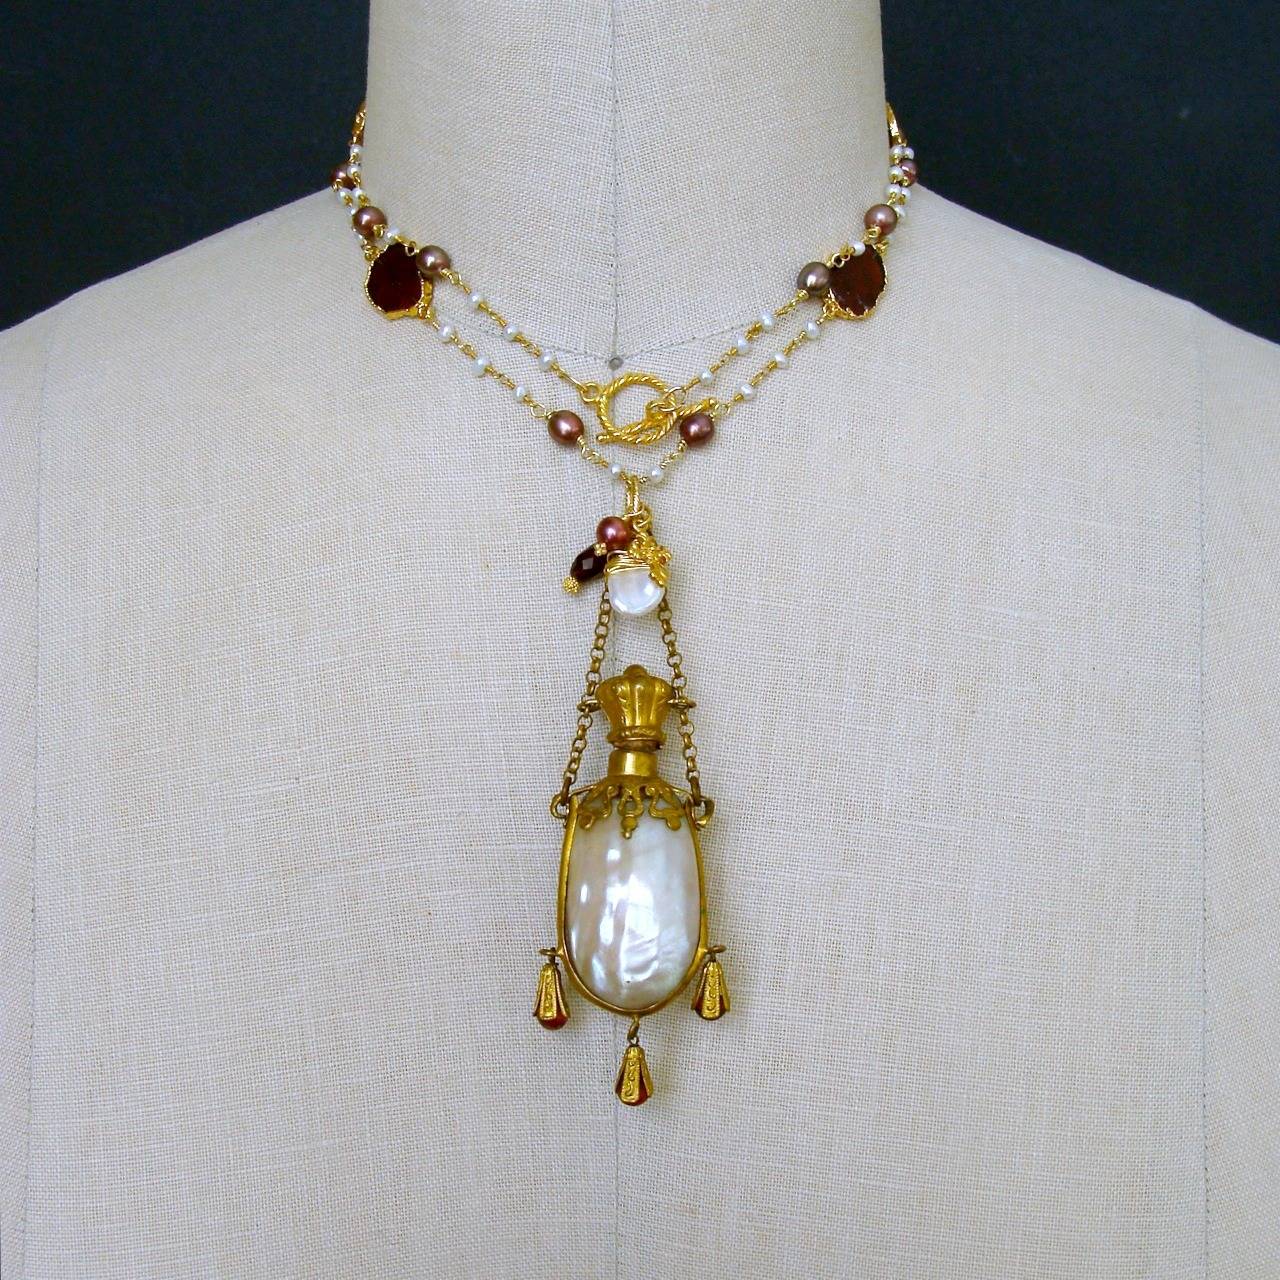 Garnet Slices Pearls Chatelaine Shell Scent Bottle Necklace 1